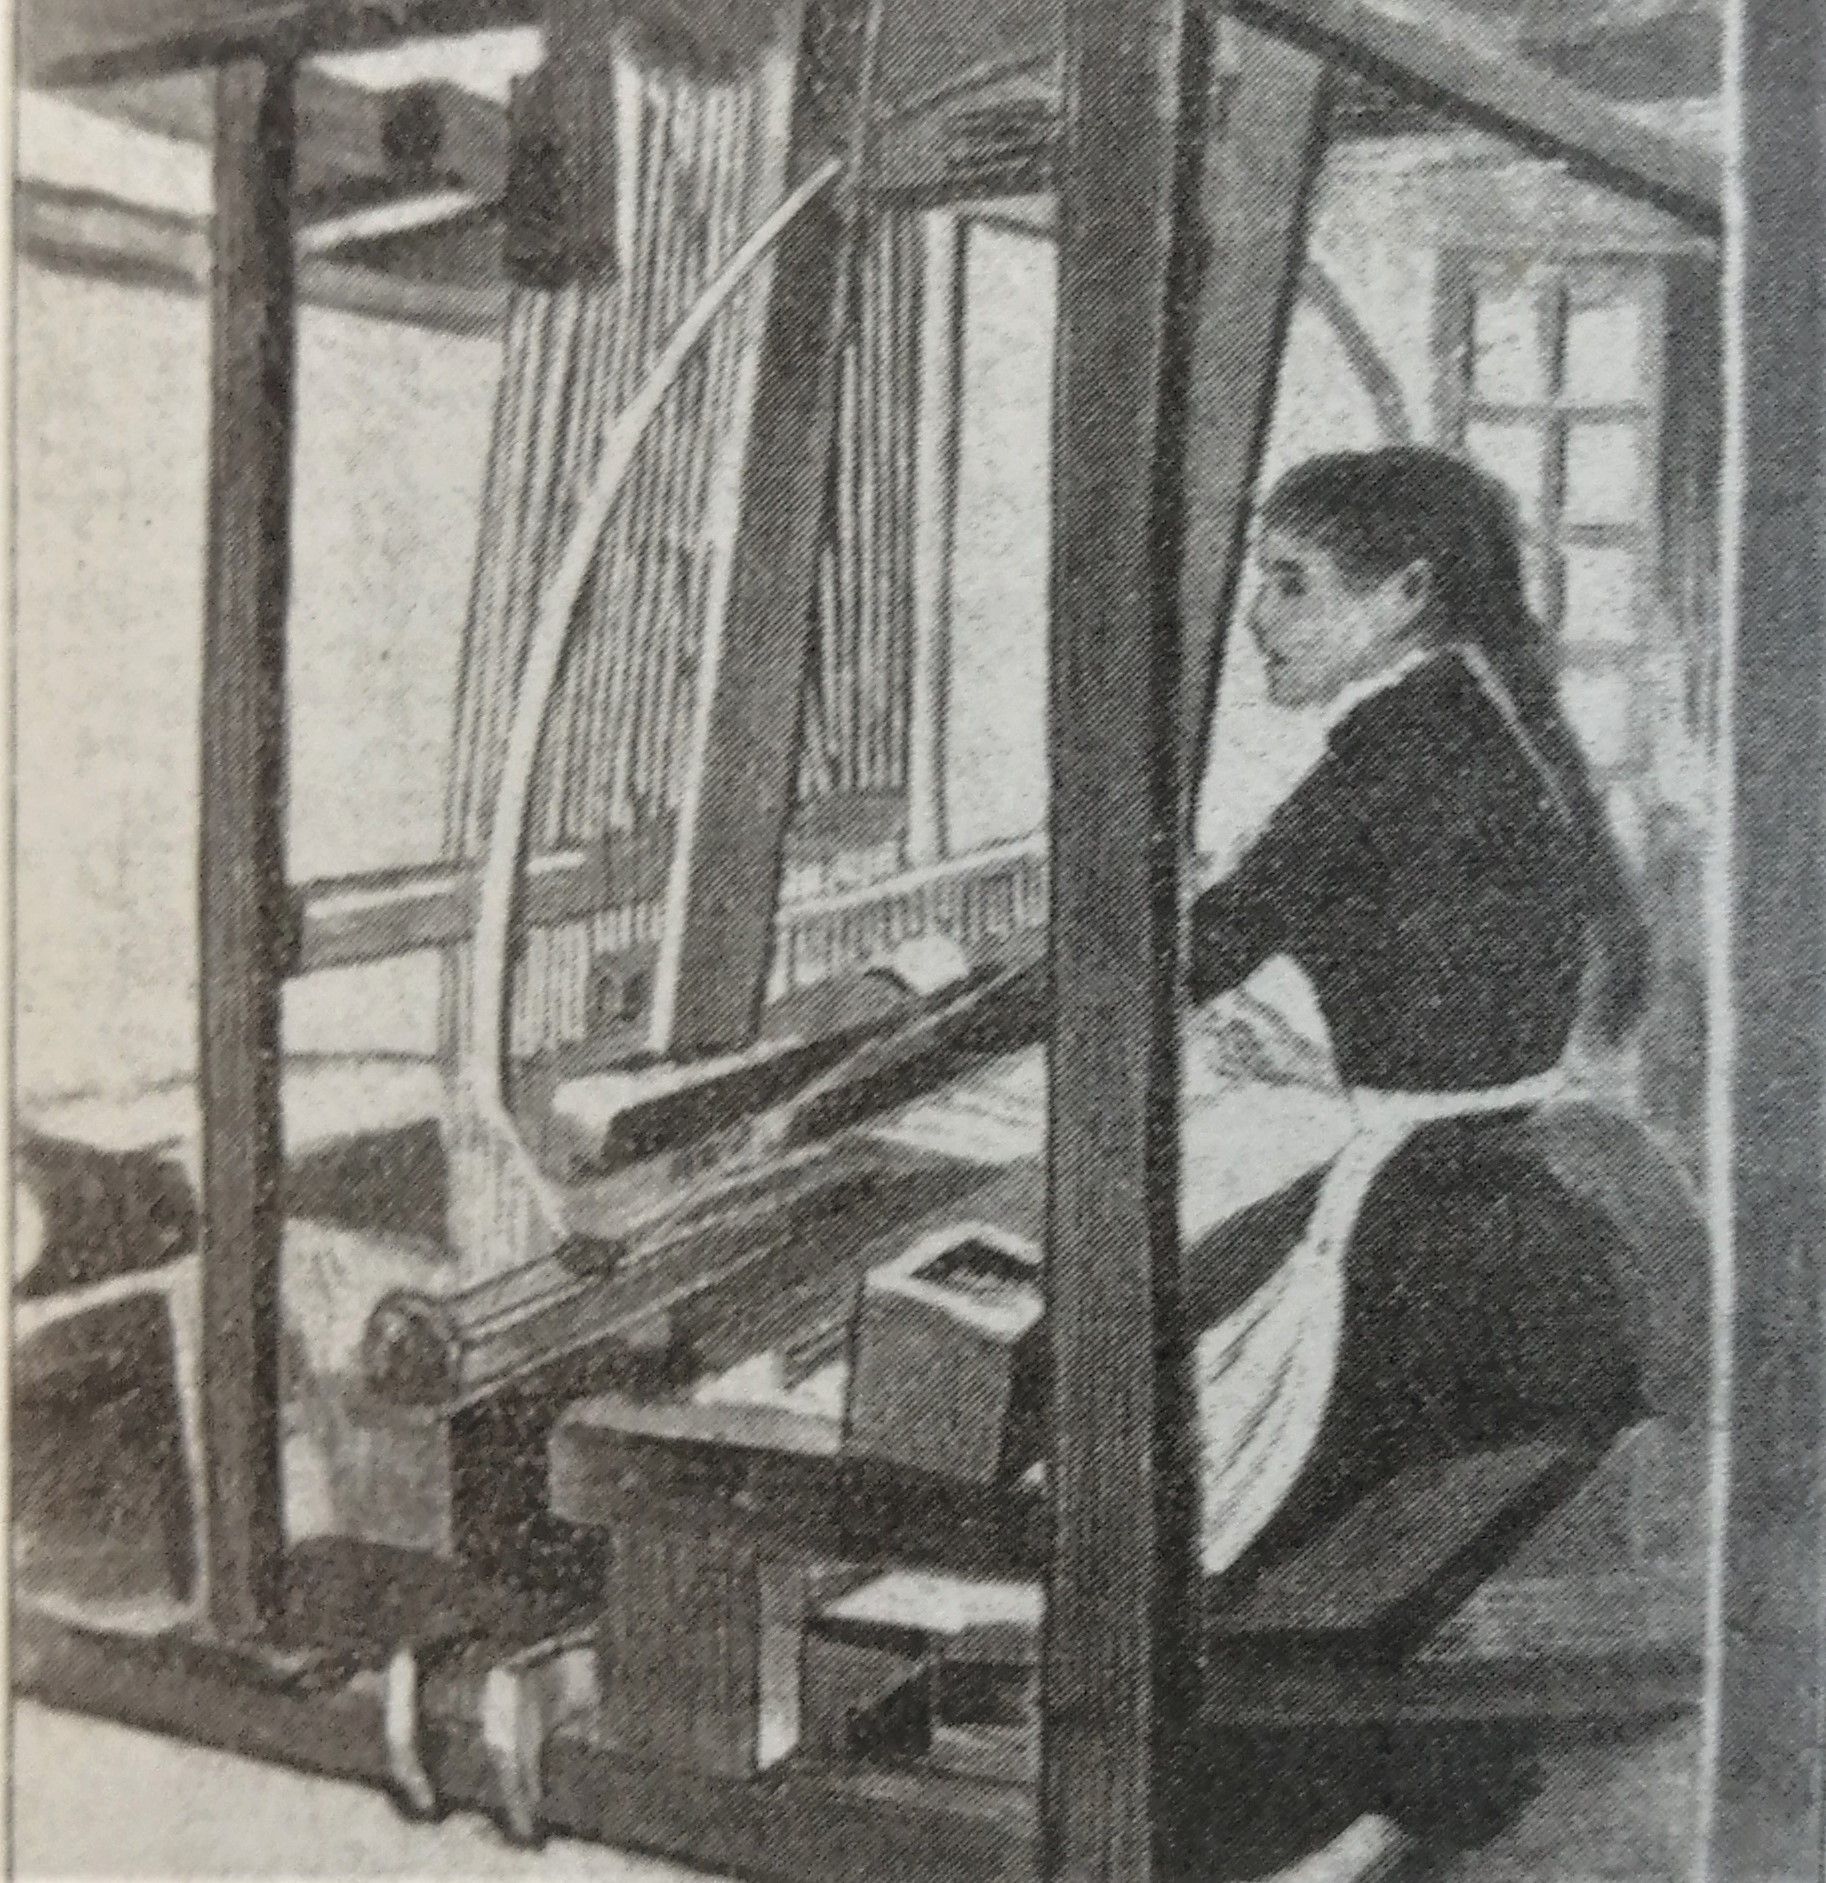  \'Girl Weaving Cambric in Country Home\' Sketch by Paul Renouard.  